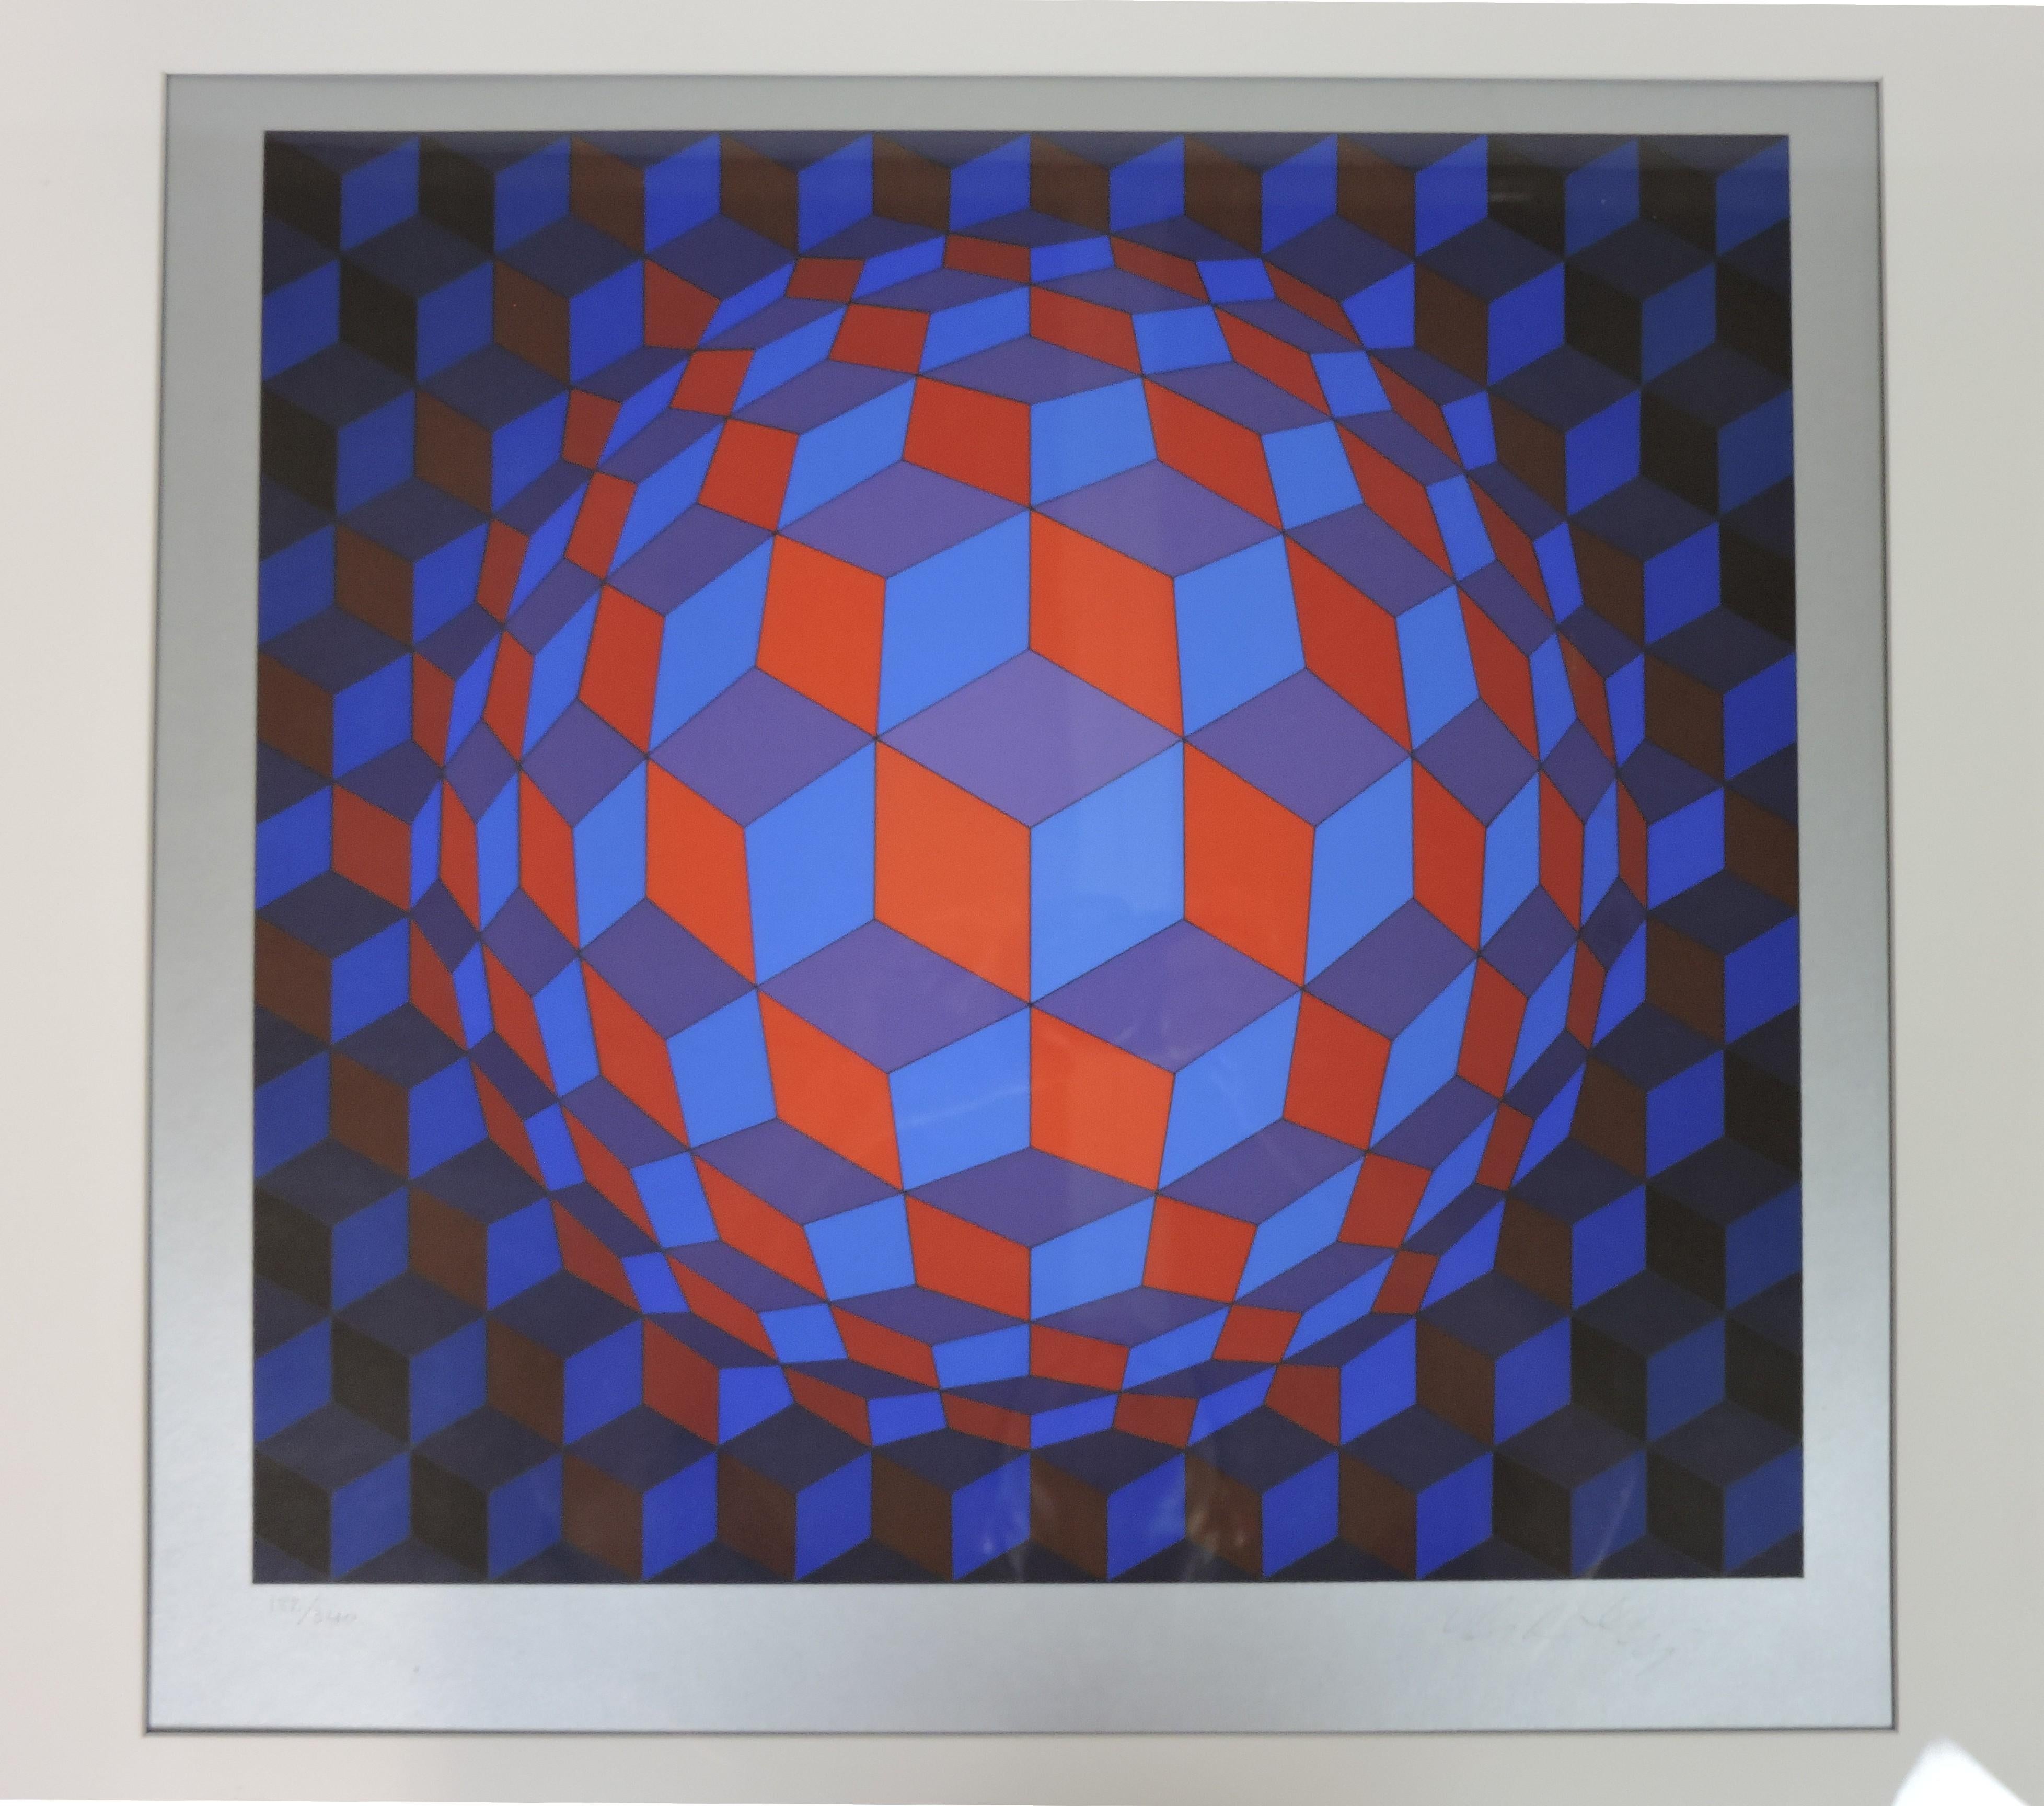 Very cool original Op Art screenprint by Victor Vasarely. Signed in the lower right hand corner, numbered 182/340 in the lower left. This has the original wood frame and matting. Frame size is 29 3/8 inches wide by 29 5/8 inches high. The image size